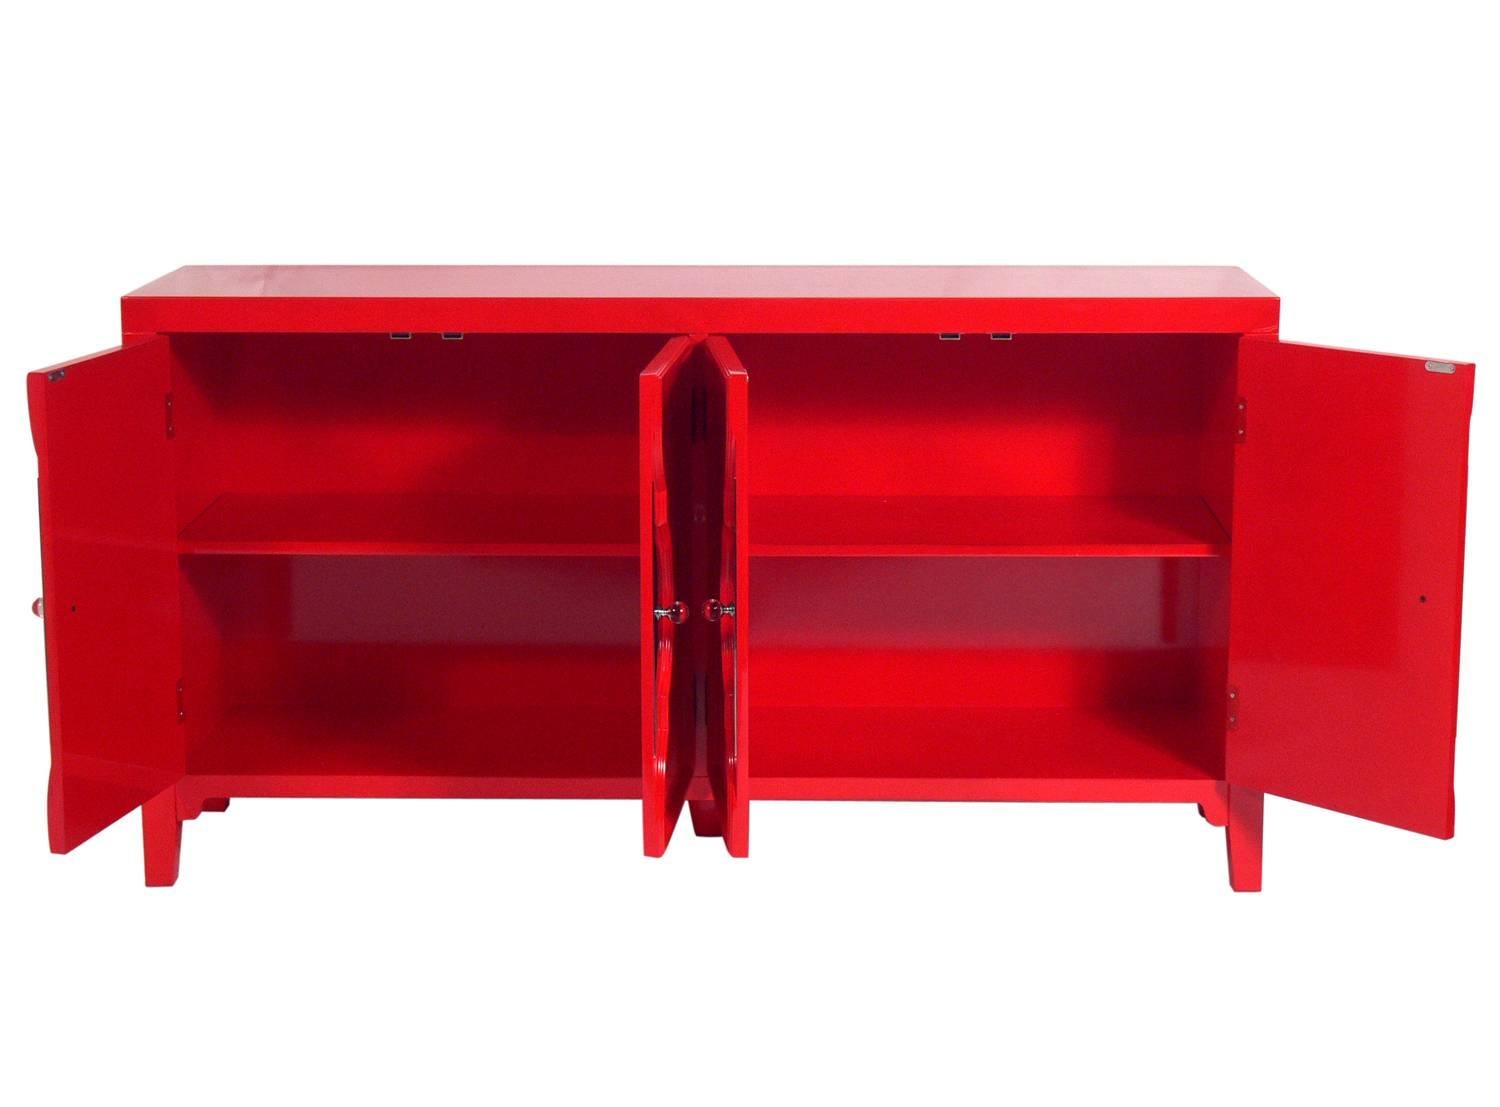 Hollywood Regency Vibrant Red Lacquer Credenza